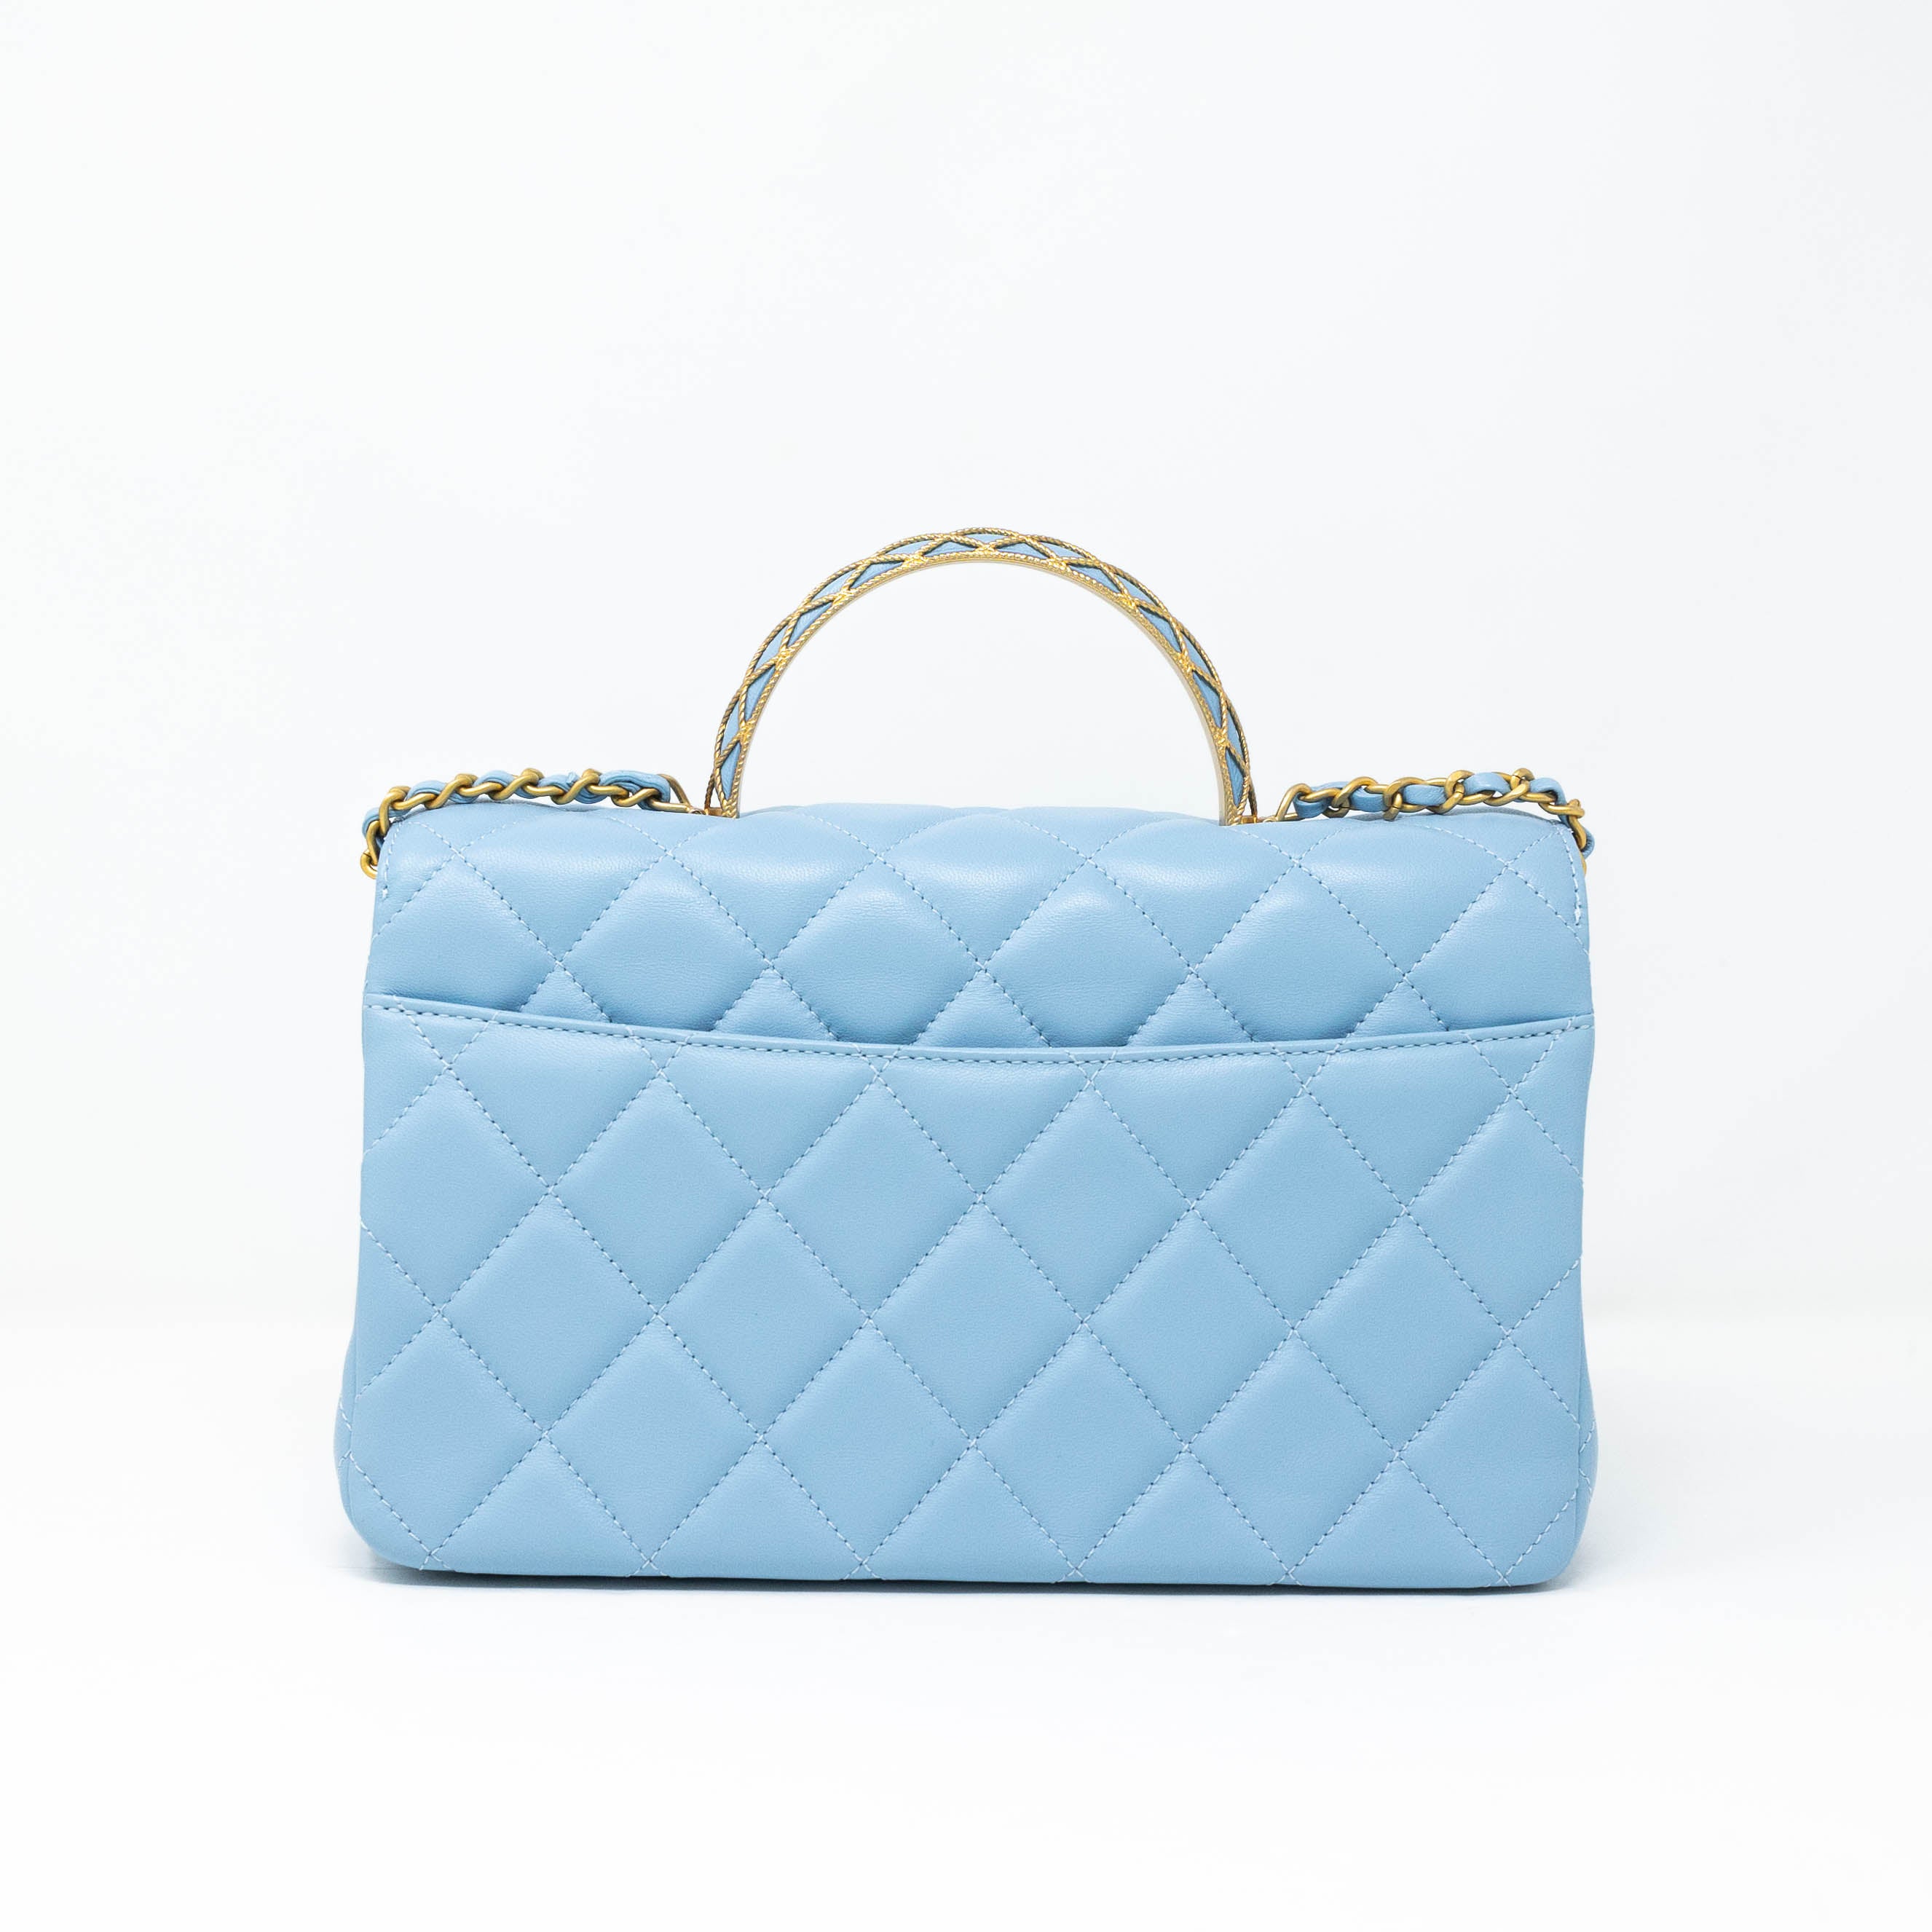 Chanel Blue Small Top Handle Flap Bag